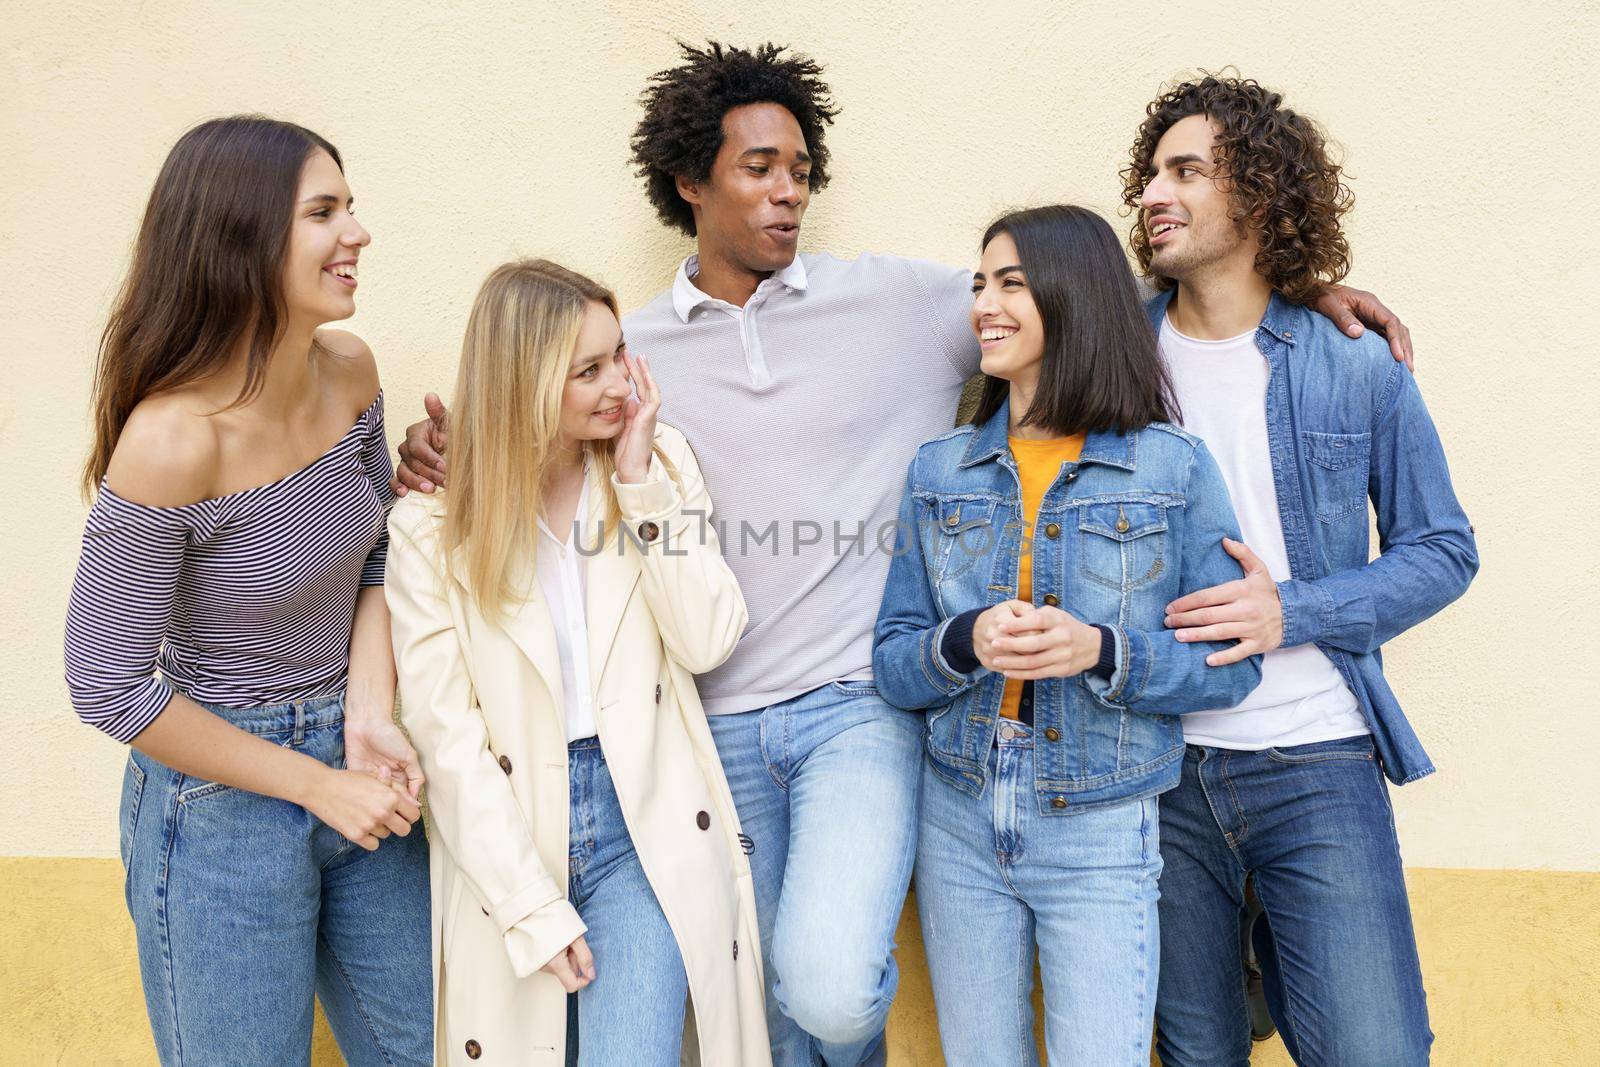 Multi-ethnic group of friends posing while having fun and laughing together against a yellow urban wall.